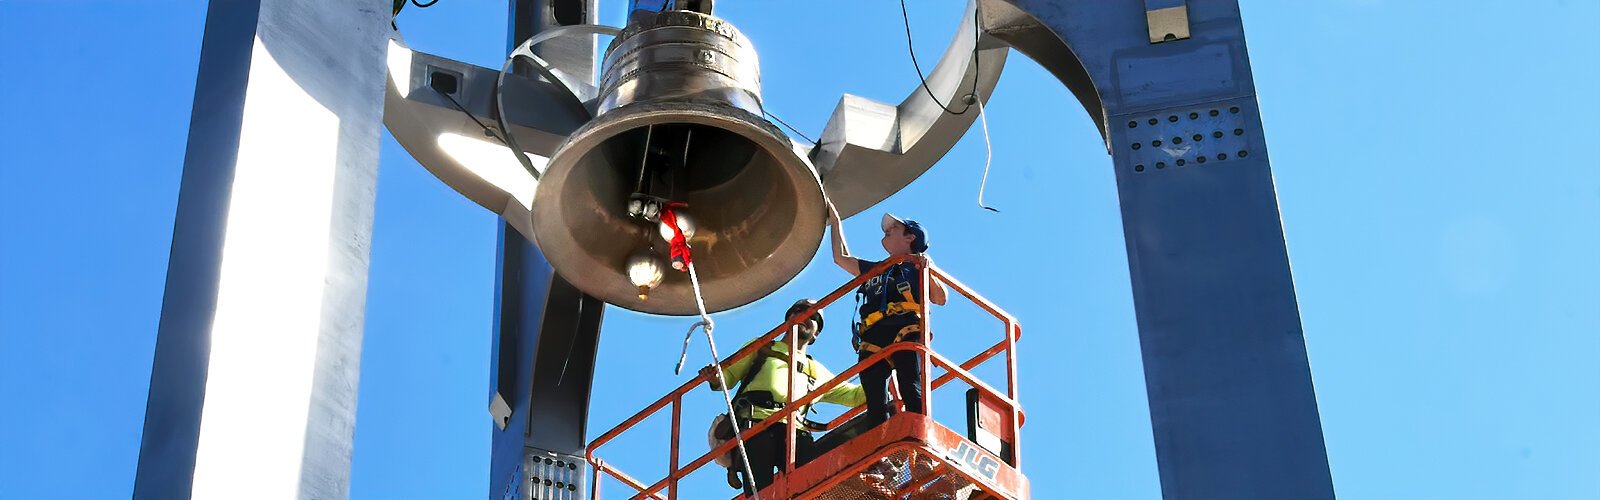 UT benefactor Susan Sykes gives a special pat to the Sykes bell, the Ars Sonora crown jewel, weighing 5,000 pounds and measuring 6 feet tall and 5 feet in diameter, and named after her and her husband John for their generous gift.